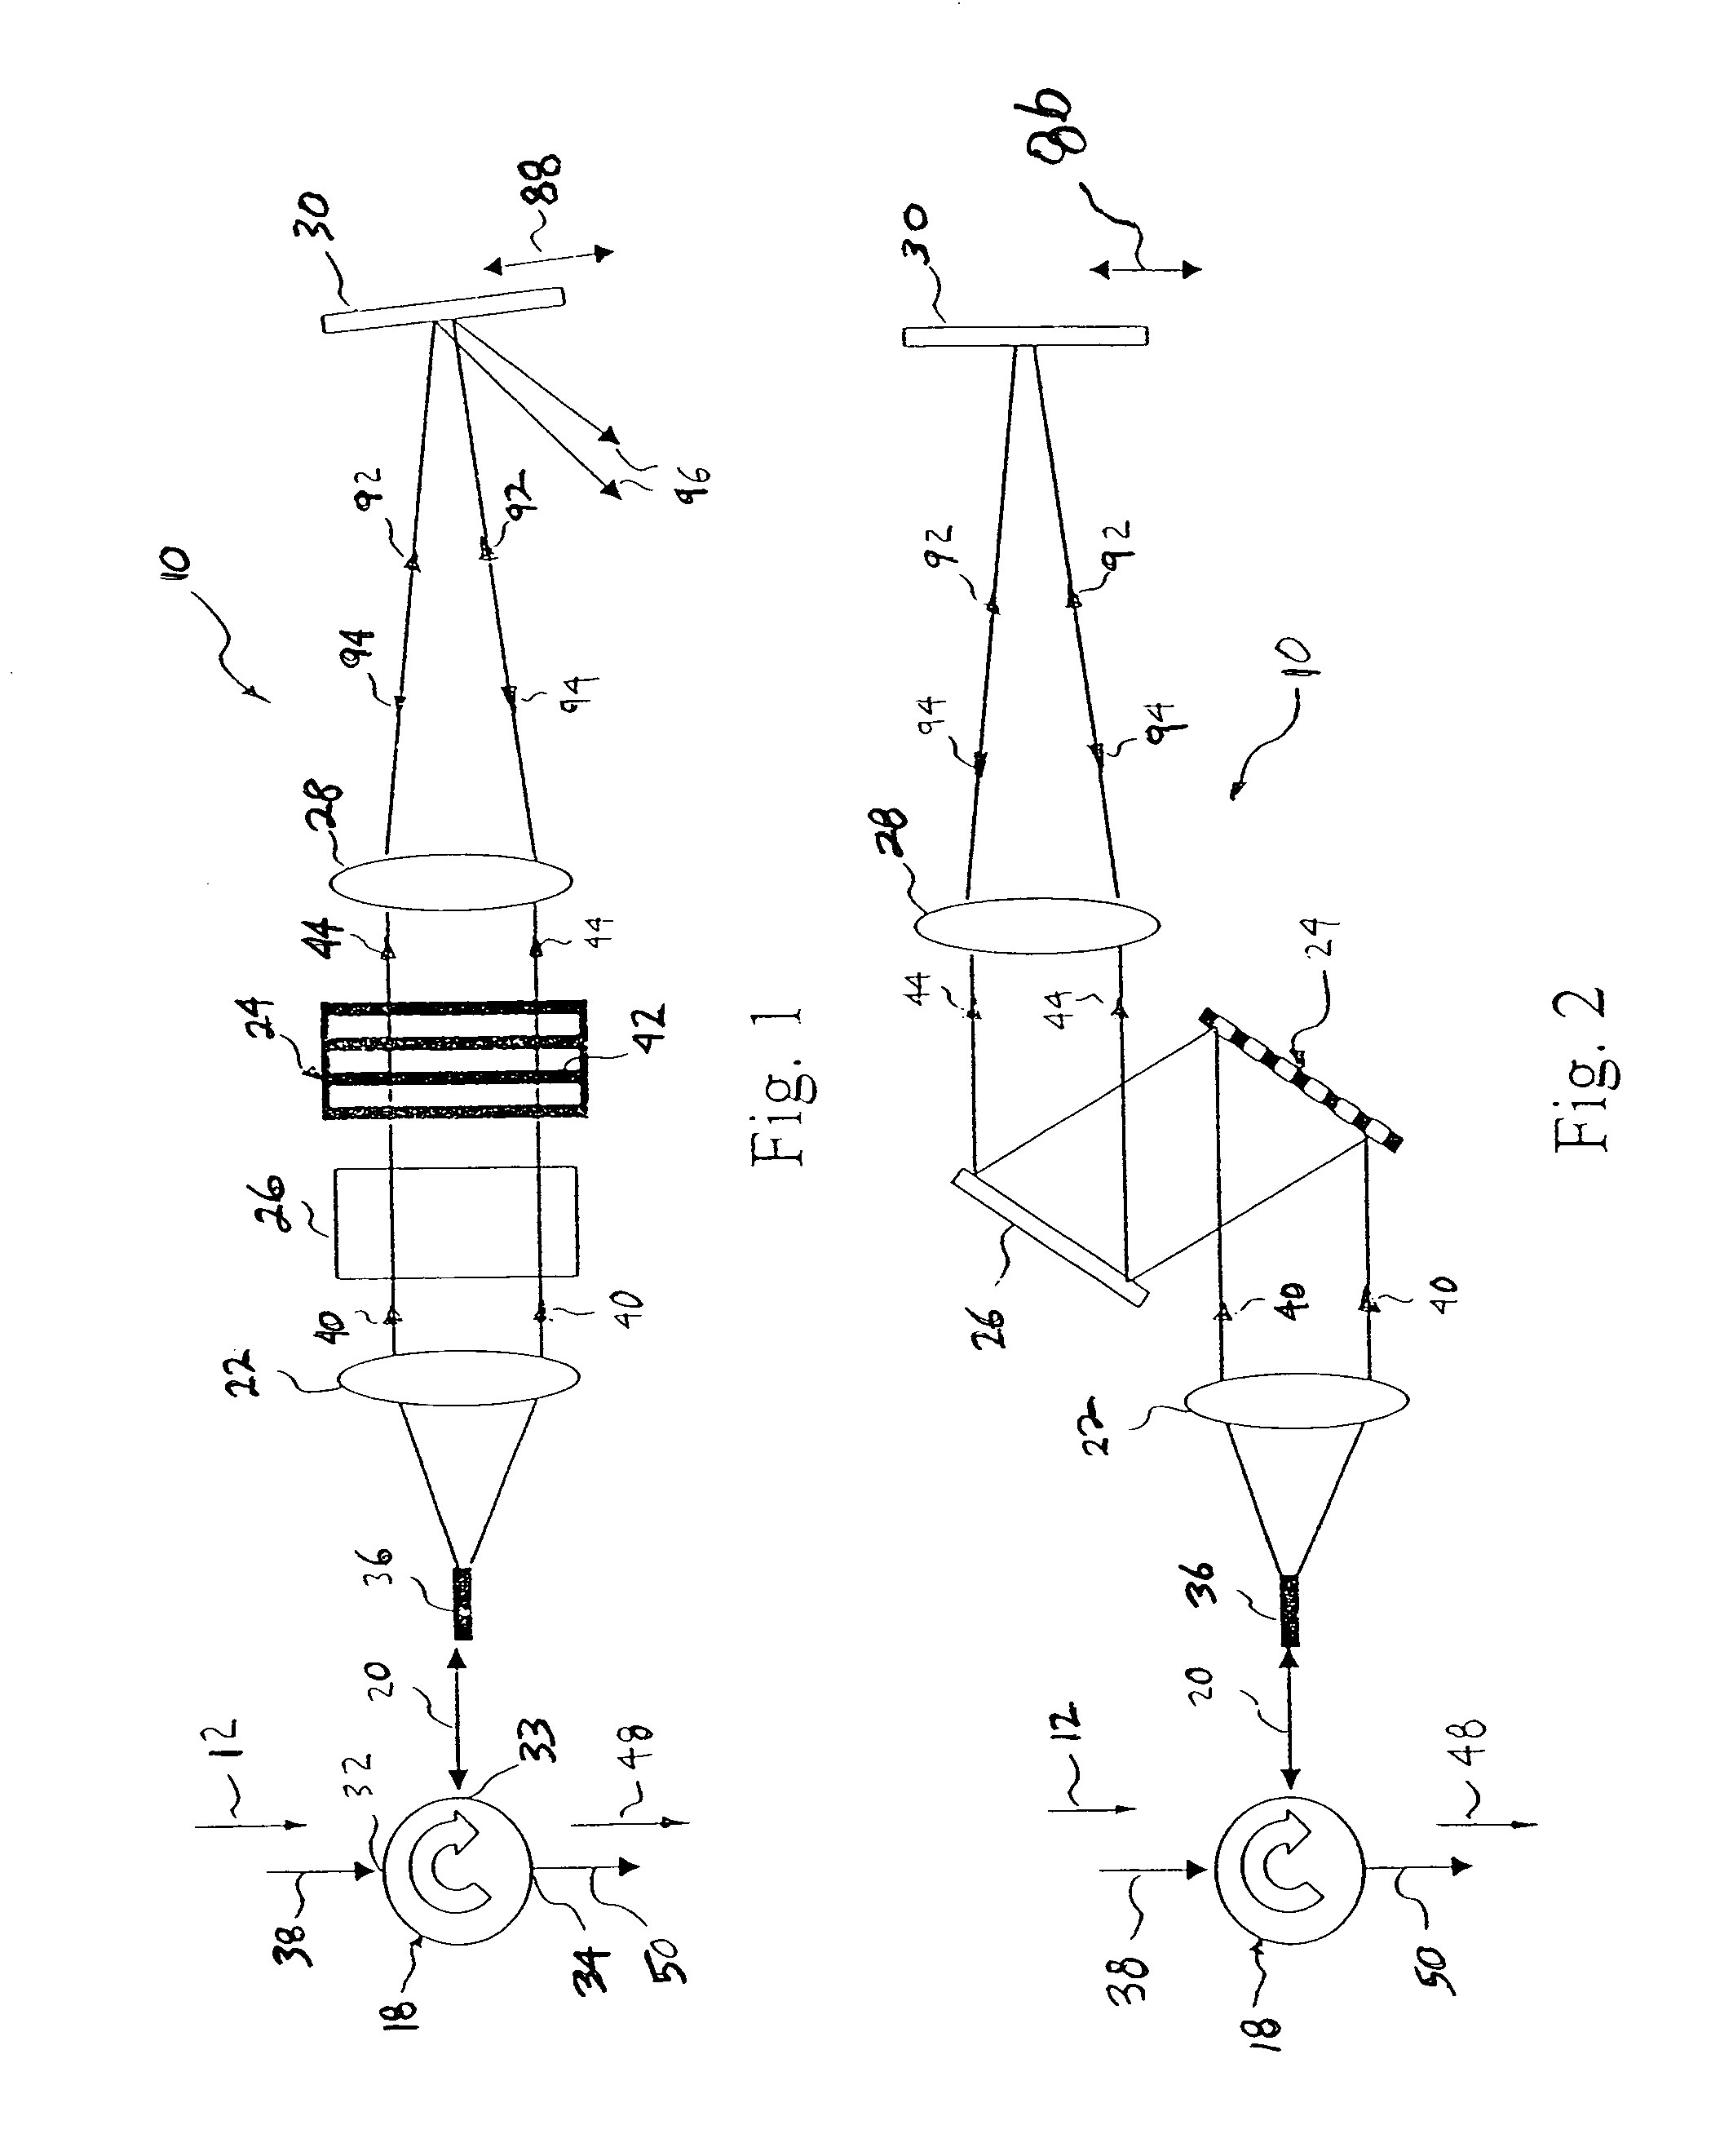 Multifunctional optical device having a spatial light modulator with an array of micromirrors